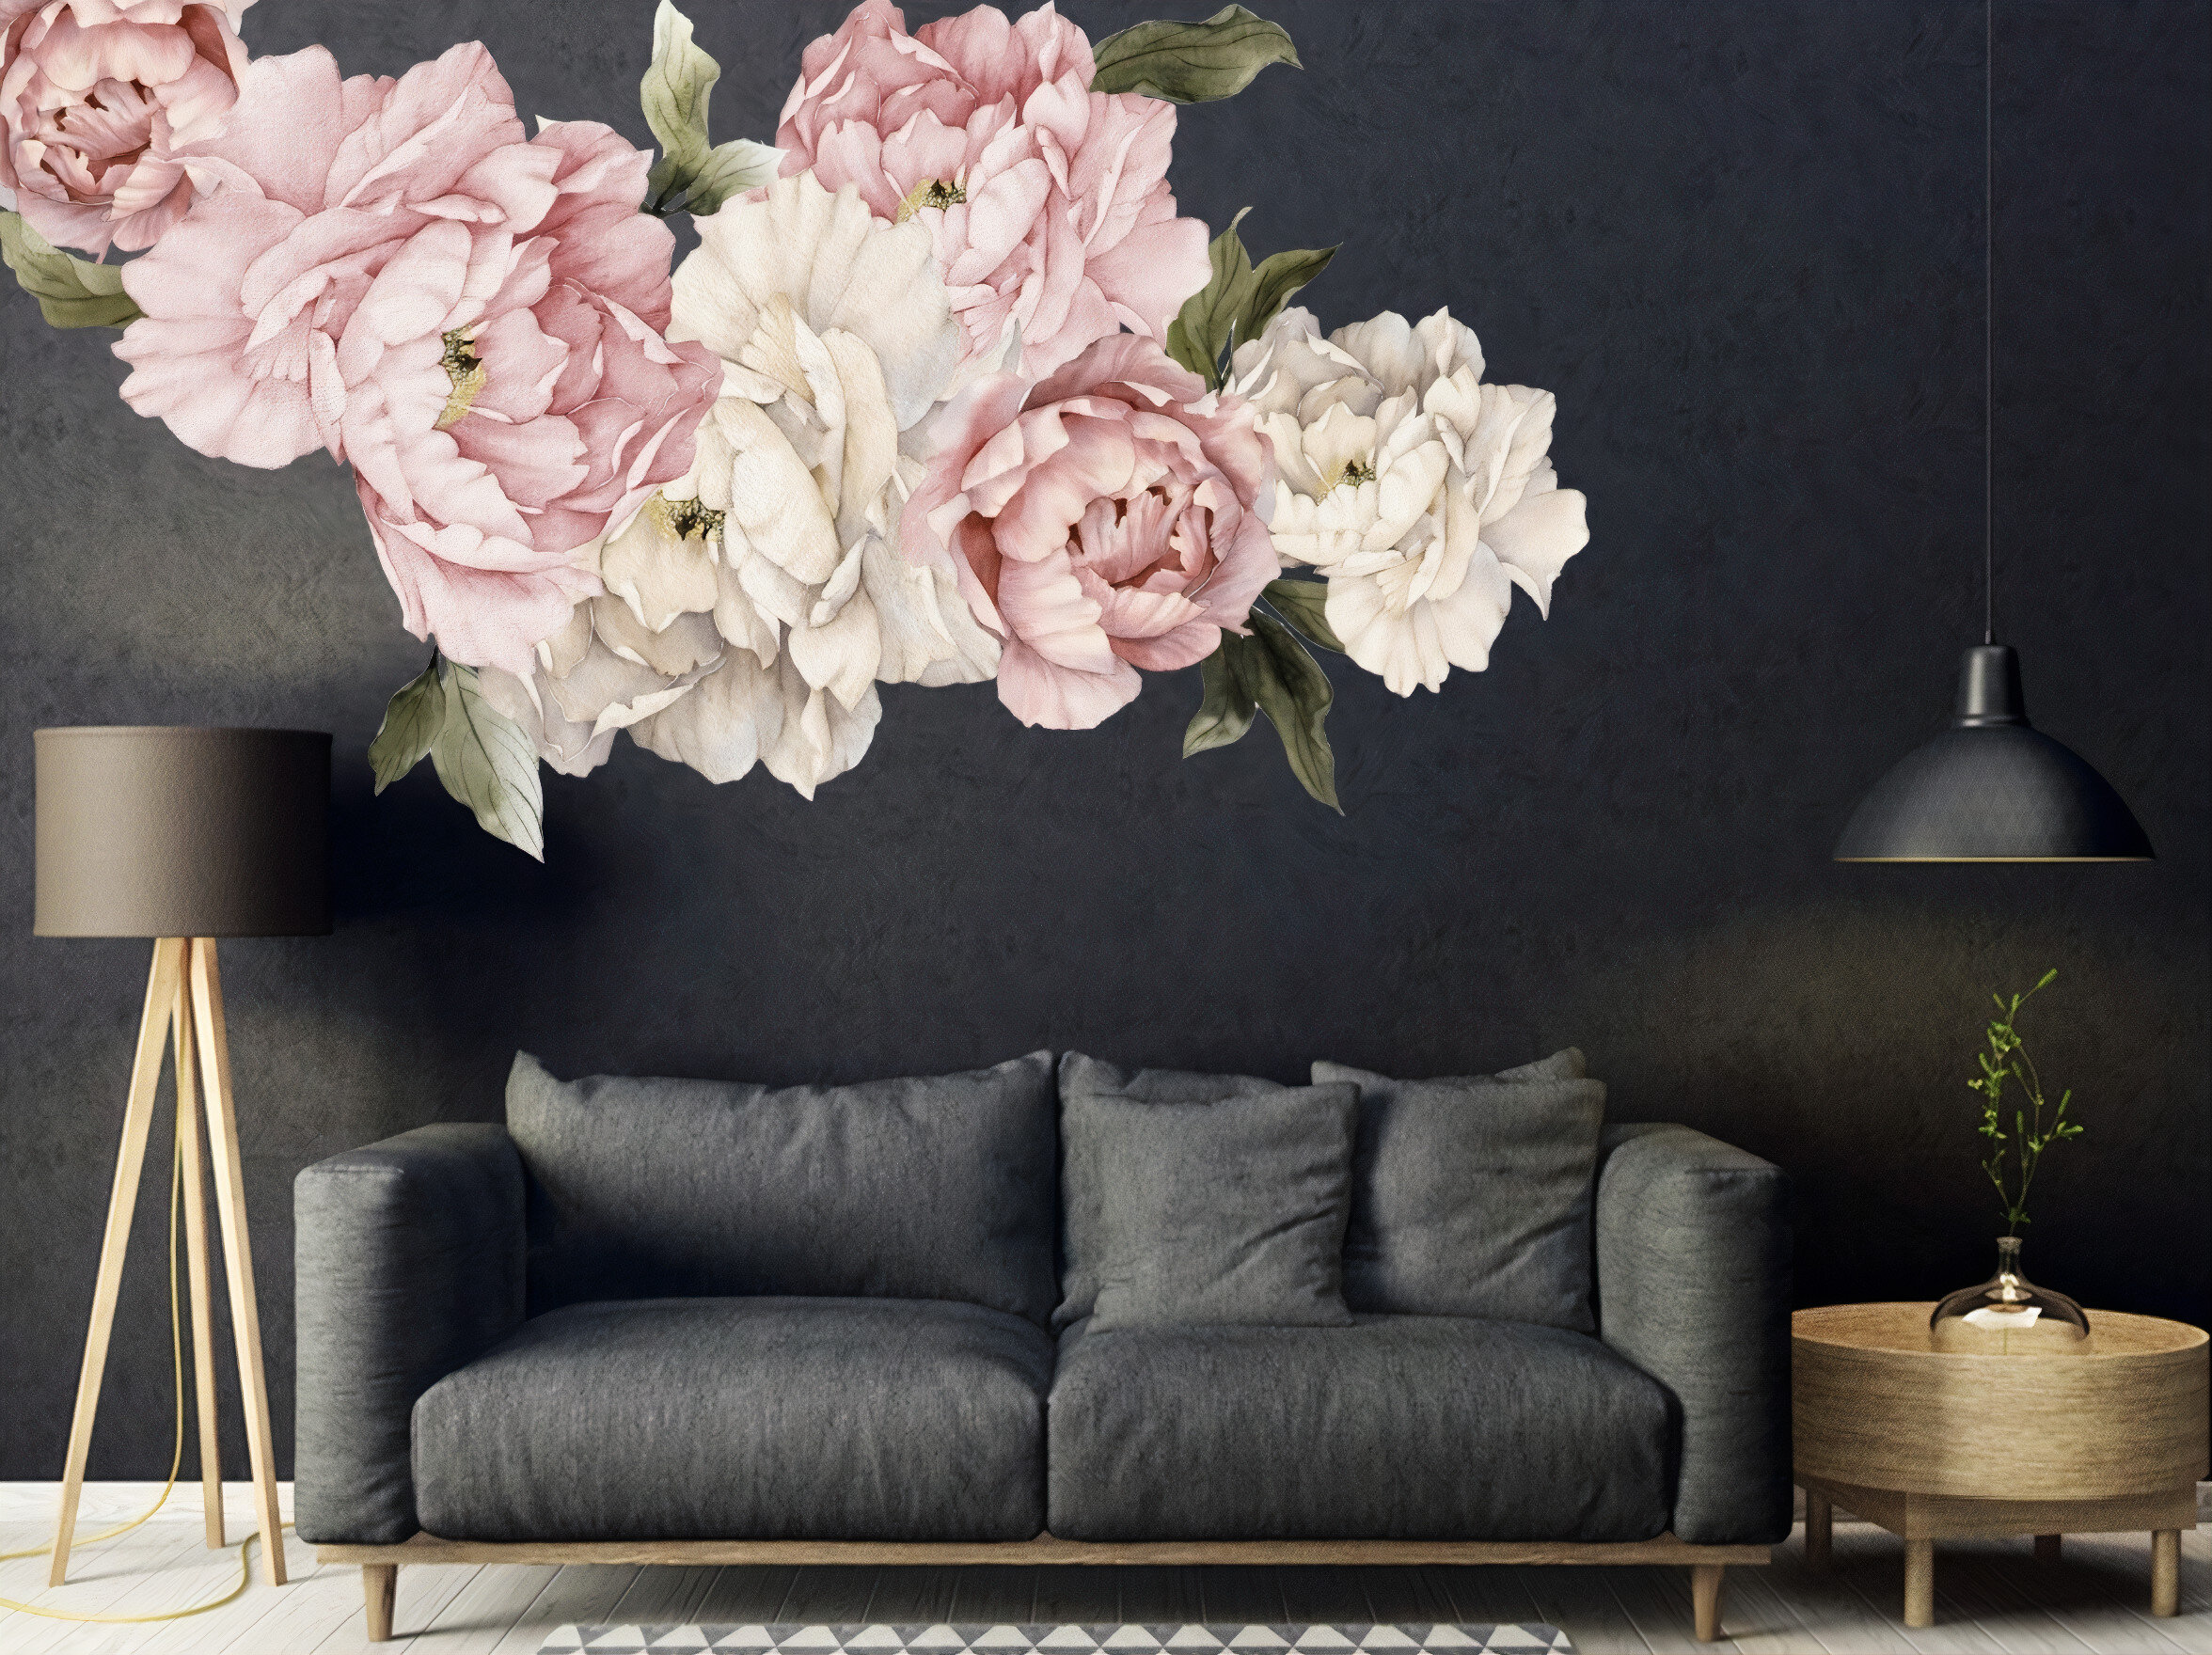 2* Removable Peony Flowers Wall Sticker PVC Decal DIY Home Room Decor Art Mural 